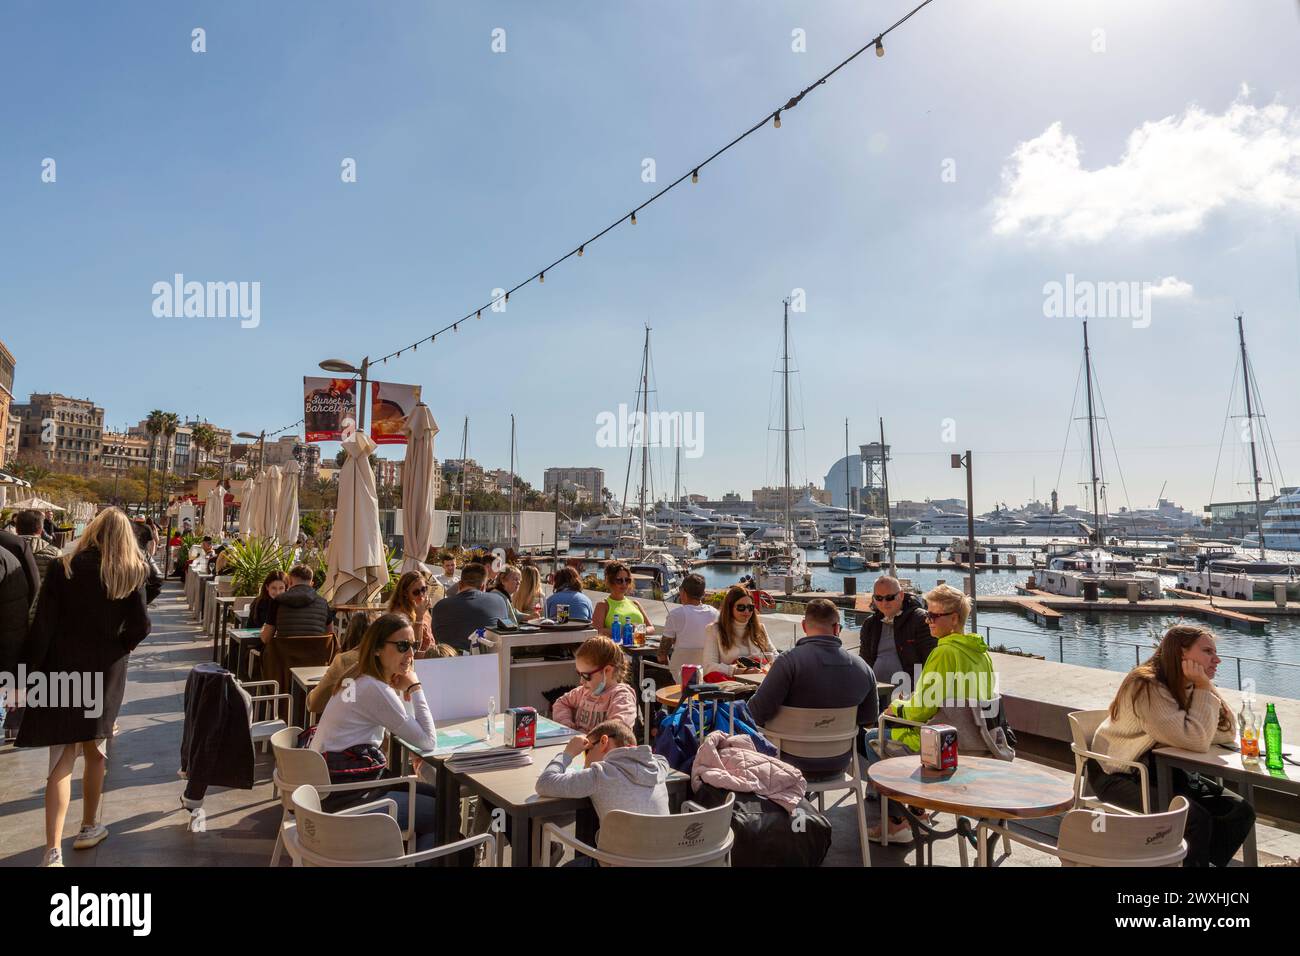 Barcelona, Spain - FEB 10, 2022: People sitting at a restaurant at the Marina Port Vell, located on the Mediterranean Coast of Barcelona, Catalonia, S Stock Photo